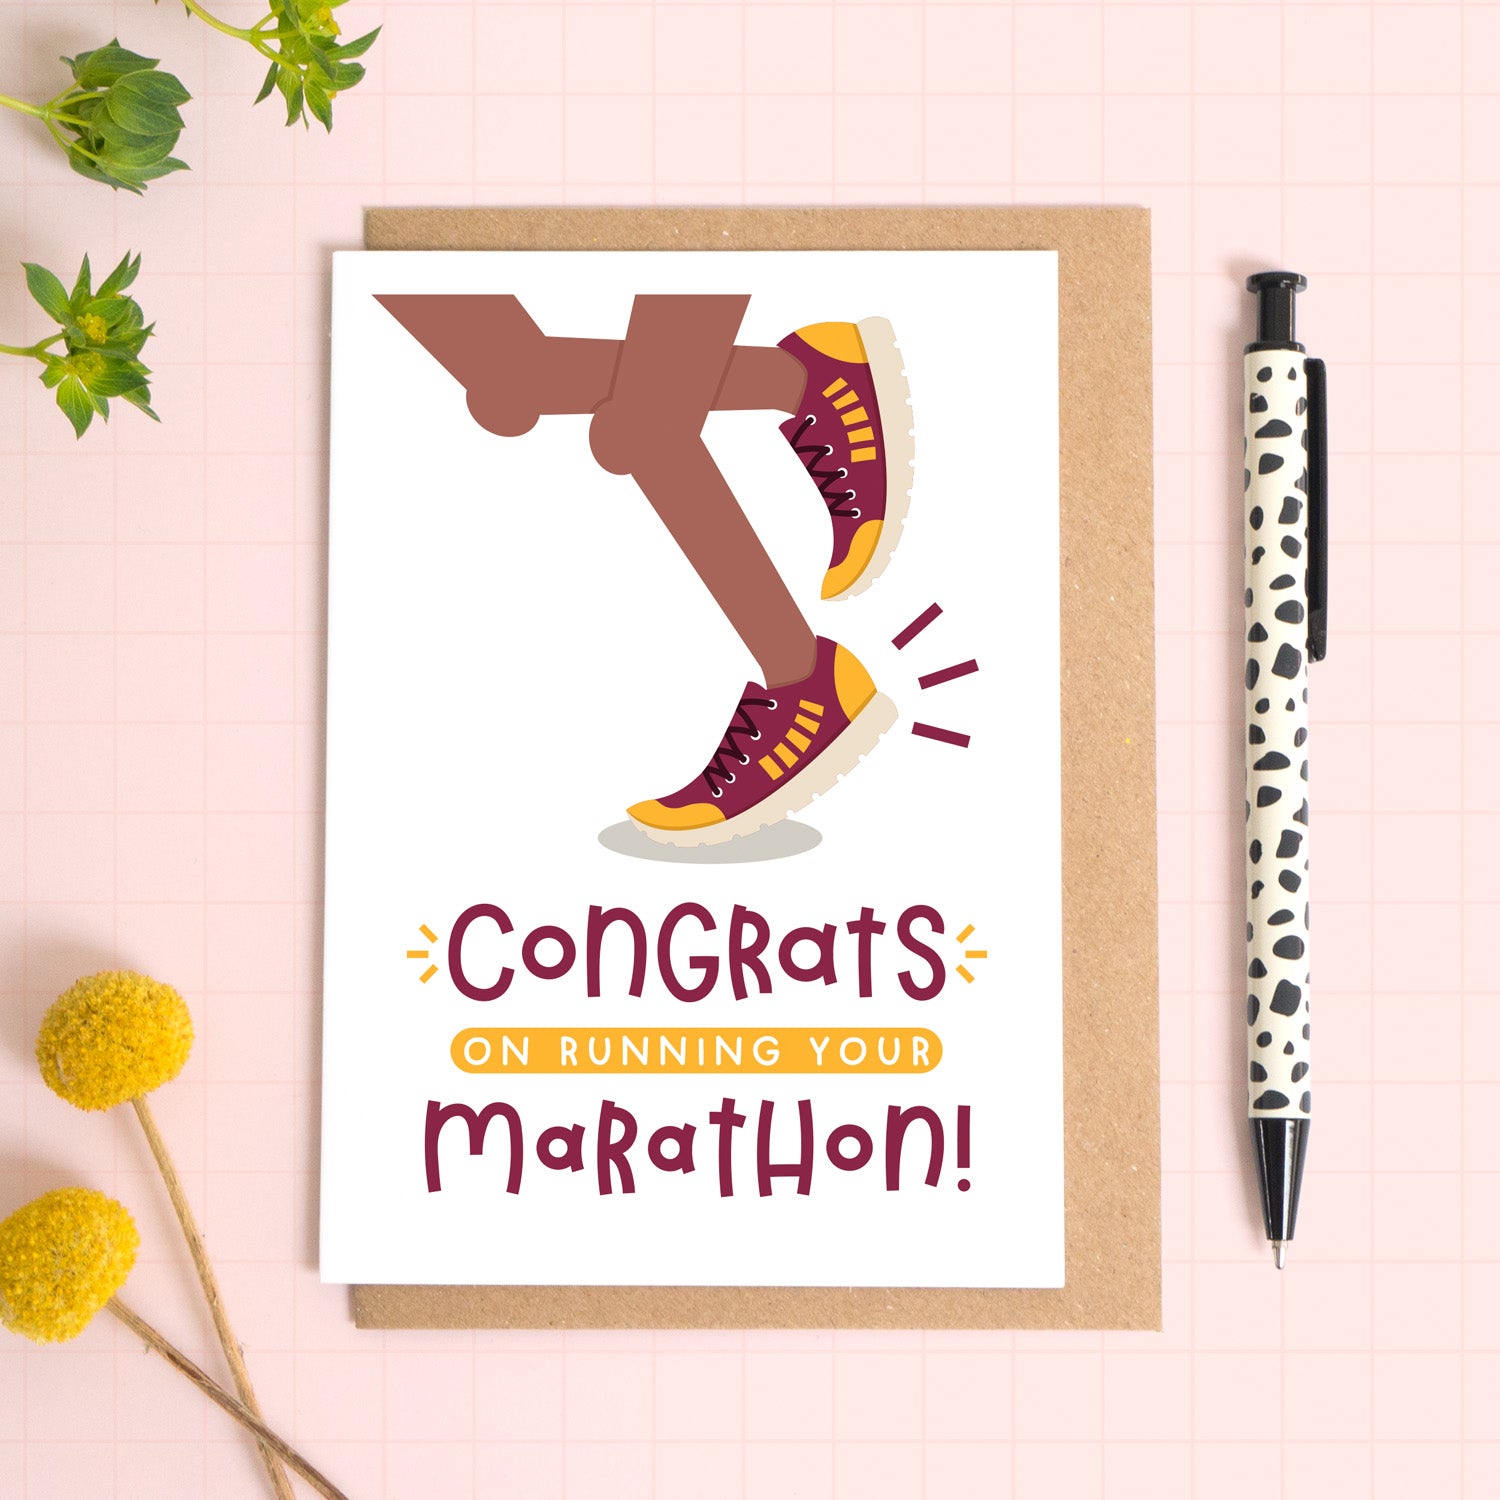 A marathon congratulations card photographed on top of a kraft brown envelope set on a pink background surrounded by foliage and a pen for scale. The card reads 'congrats on running your marathon' and features a pair of brown legs.